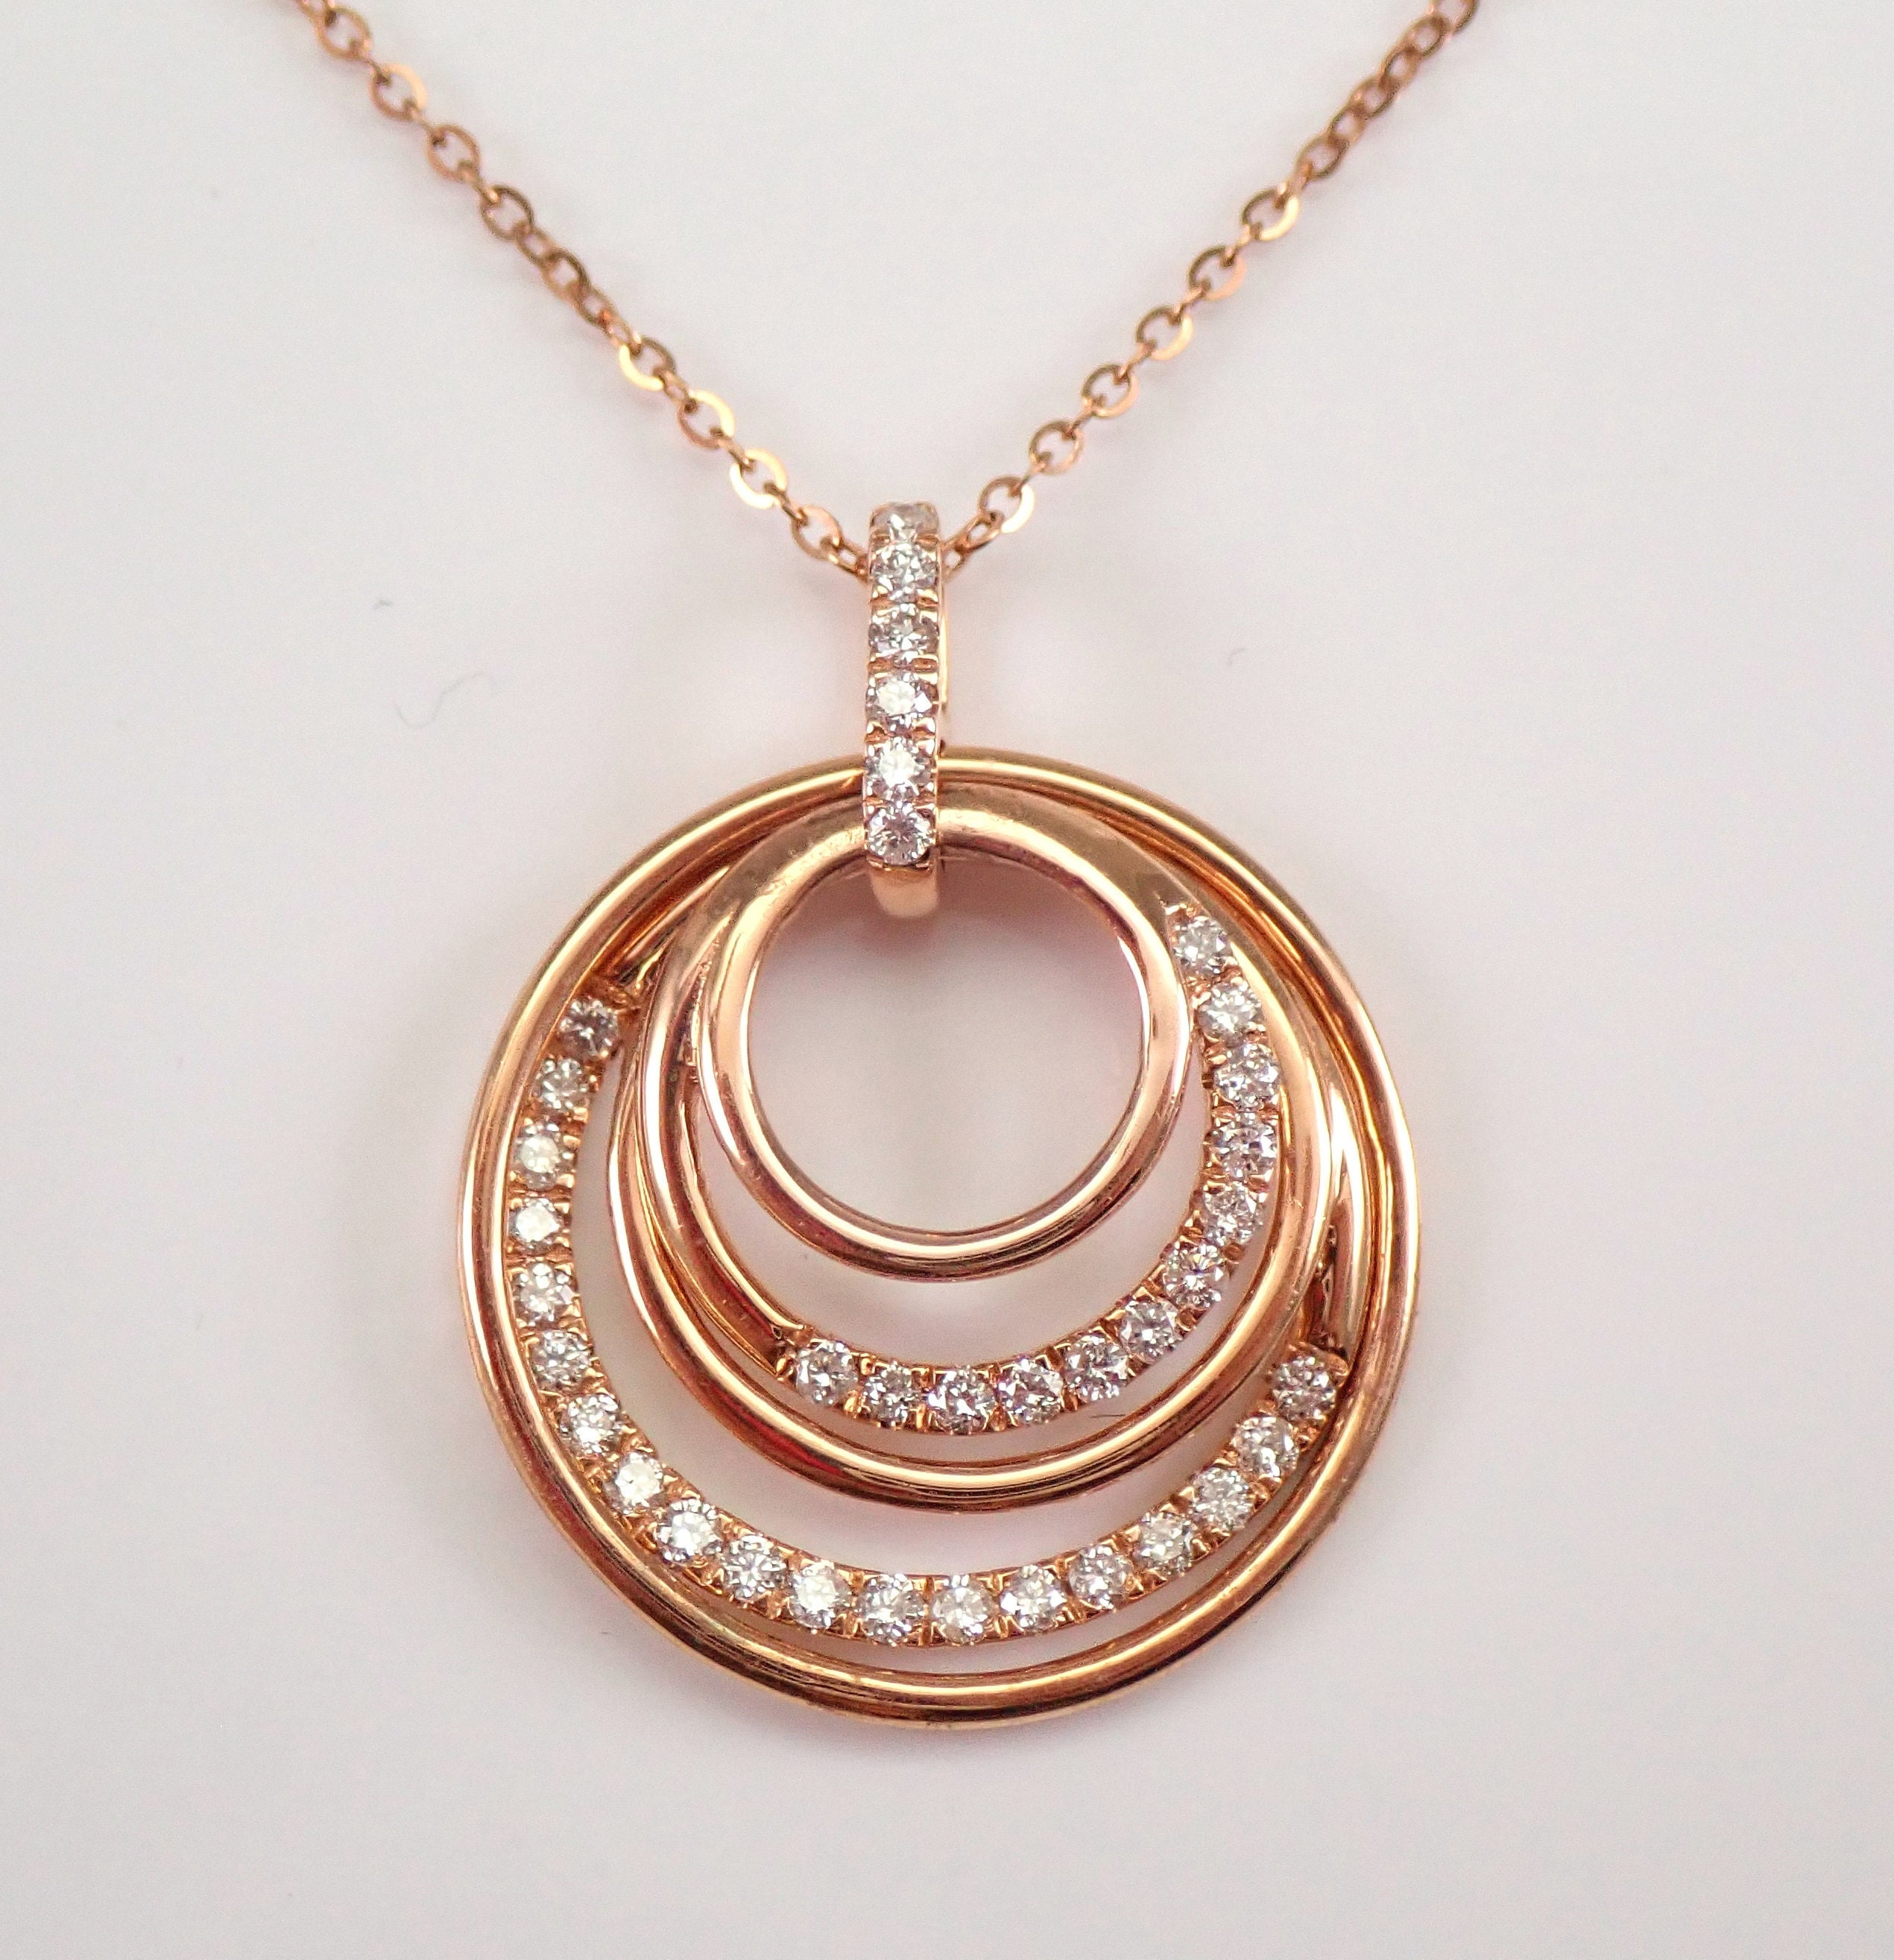 Rose Gold Necklace Eternity Necklace Sisters Necklace Eternity Circle  Necklace Circle Necklace Two Circle Rings Pendant Rose Gold Necklace - Etsy  | Necklace, Eternity circle necklace, Circle necklace